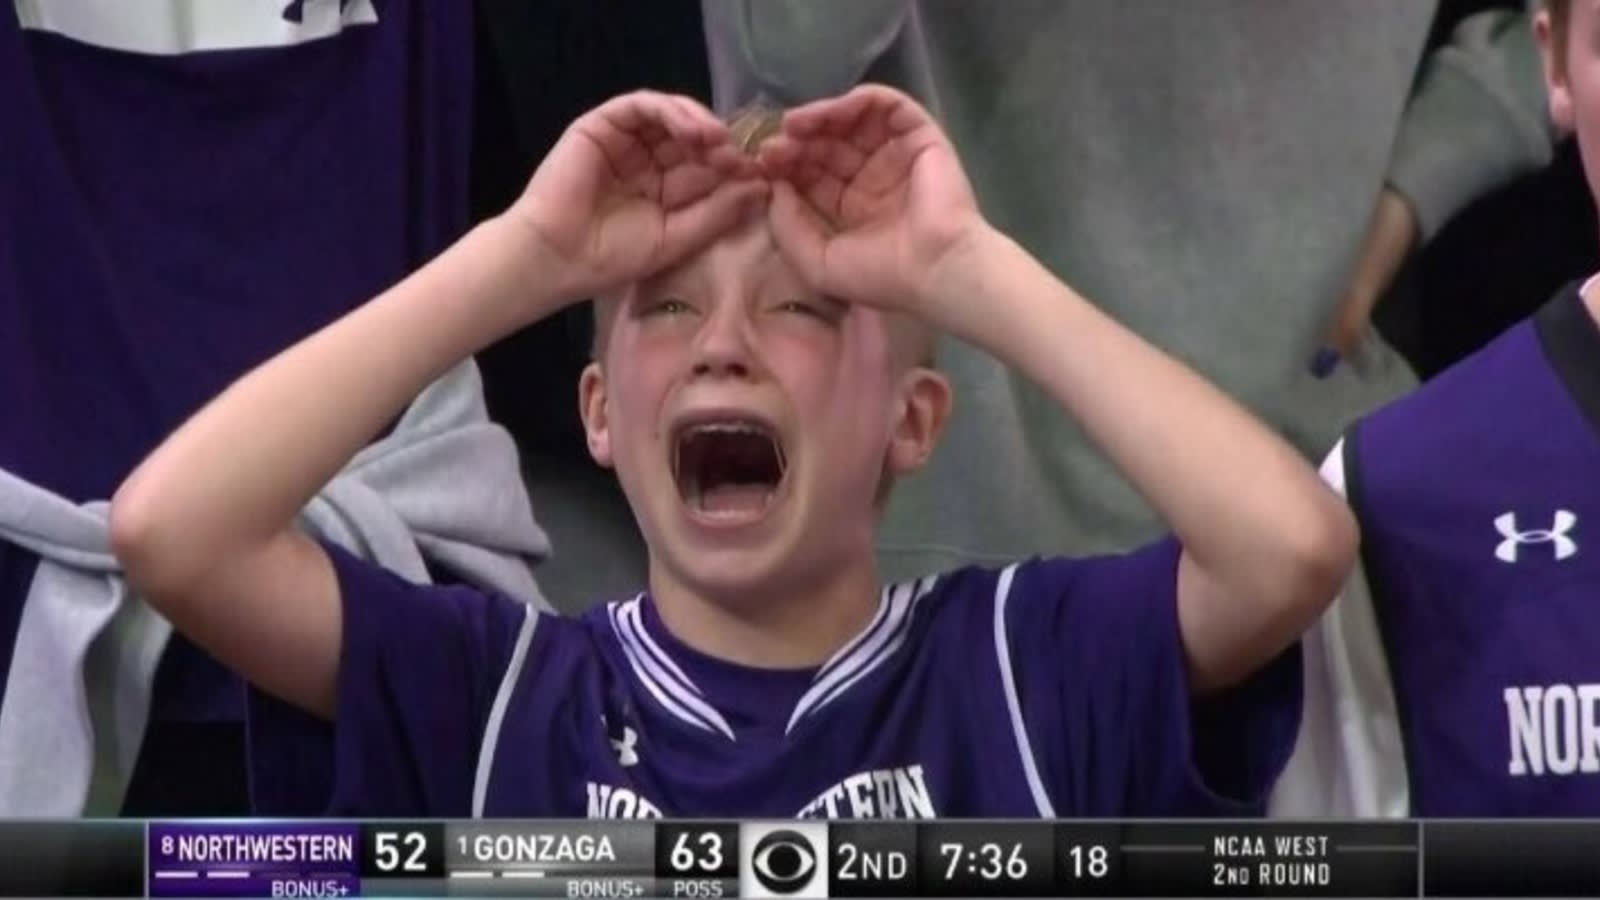 Crying Northwestern fan is this year's viral tourney fan